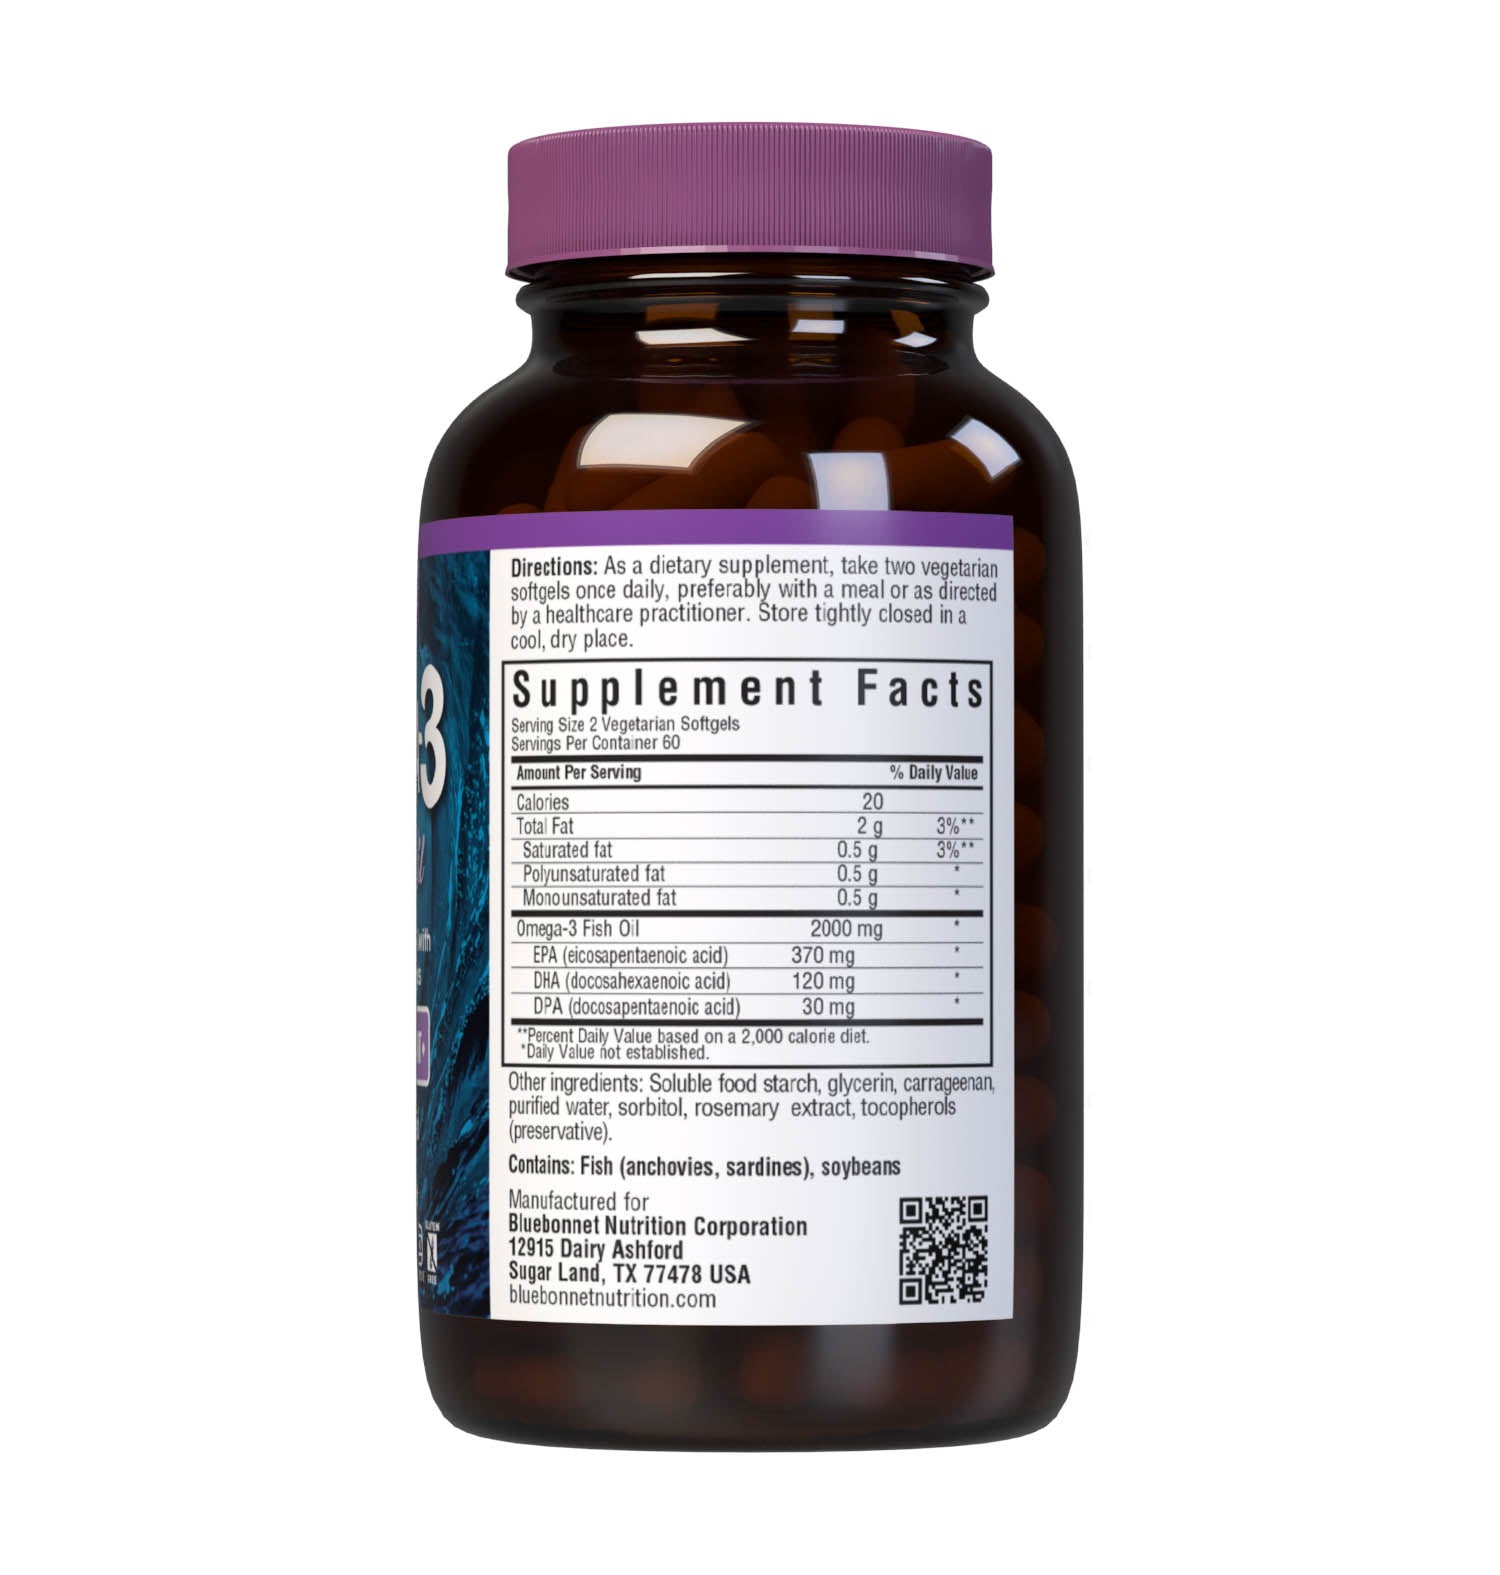 Omega-3 Kosher Fish Oil 120 Vegetarian Softgels are formulated with EPA, DHA and DPA to help support heart, brain and joint health by utilizing refined omega-3s from wild ocean fish. Supplement facts panel. #size_120 count